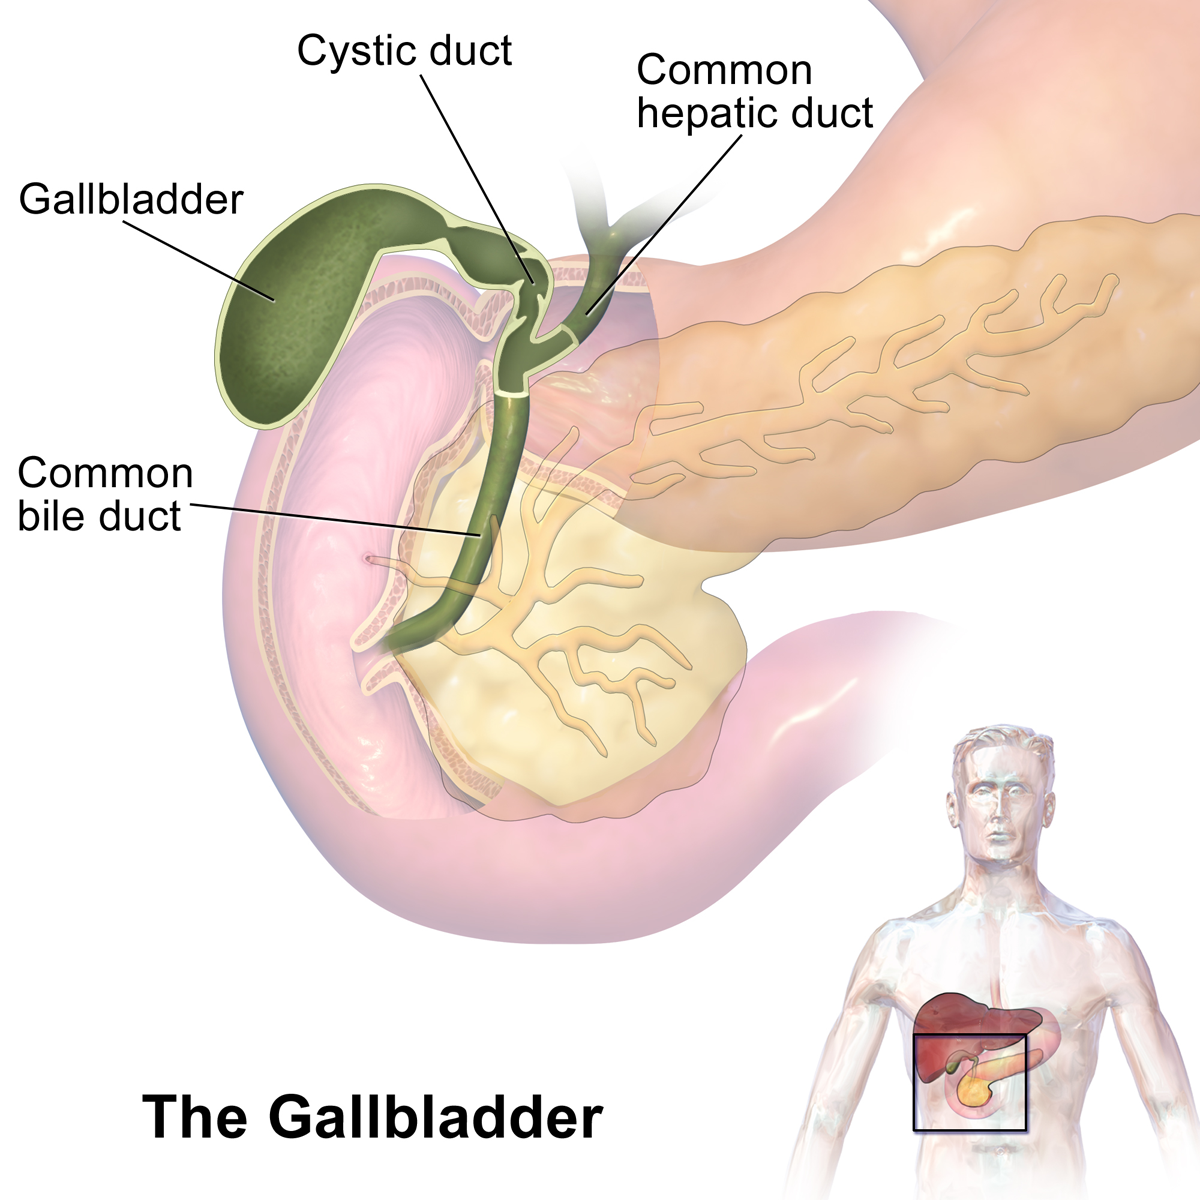 Contact Dr Venugopal Pareek, Laparoscopic surgeon near me for Best Gallbladder removal surgery in Hyderabad